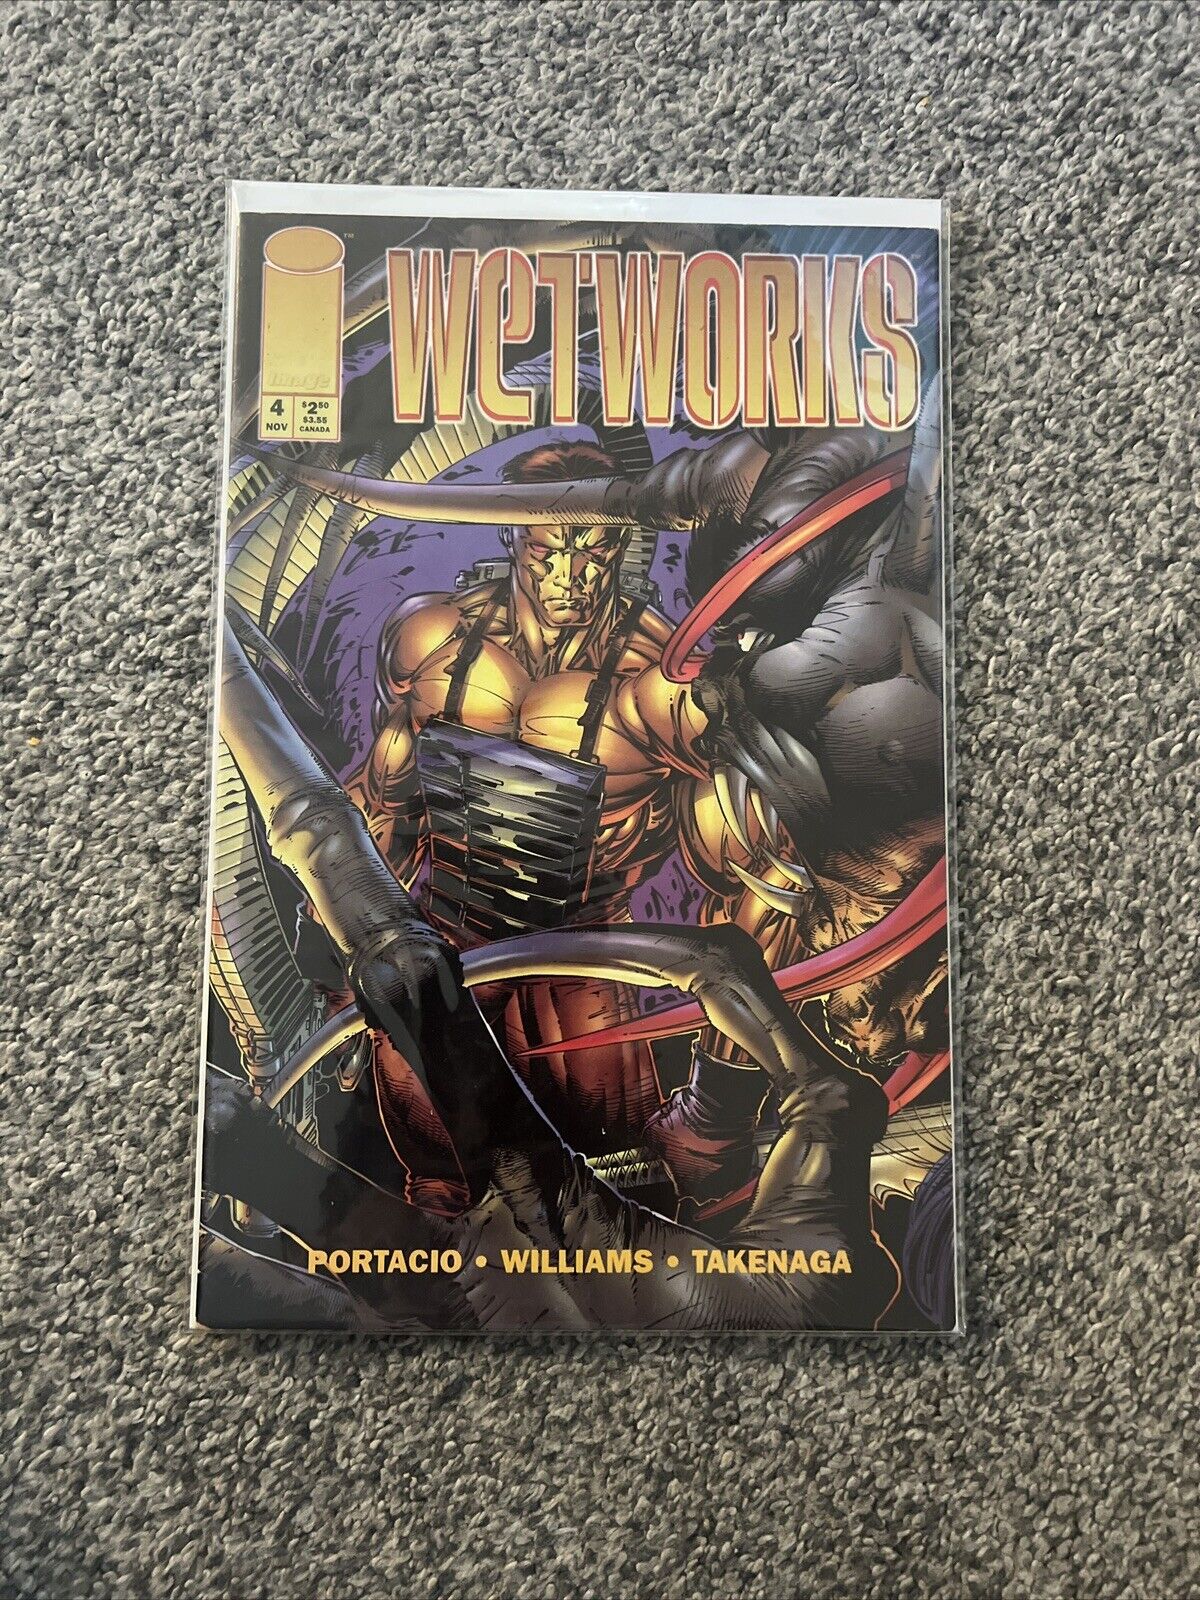 WETWORKS  Issue # 4  1994  VF+ Image Comics Key Issue